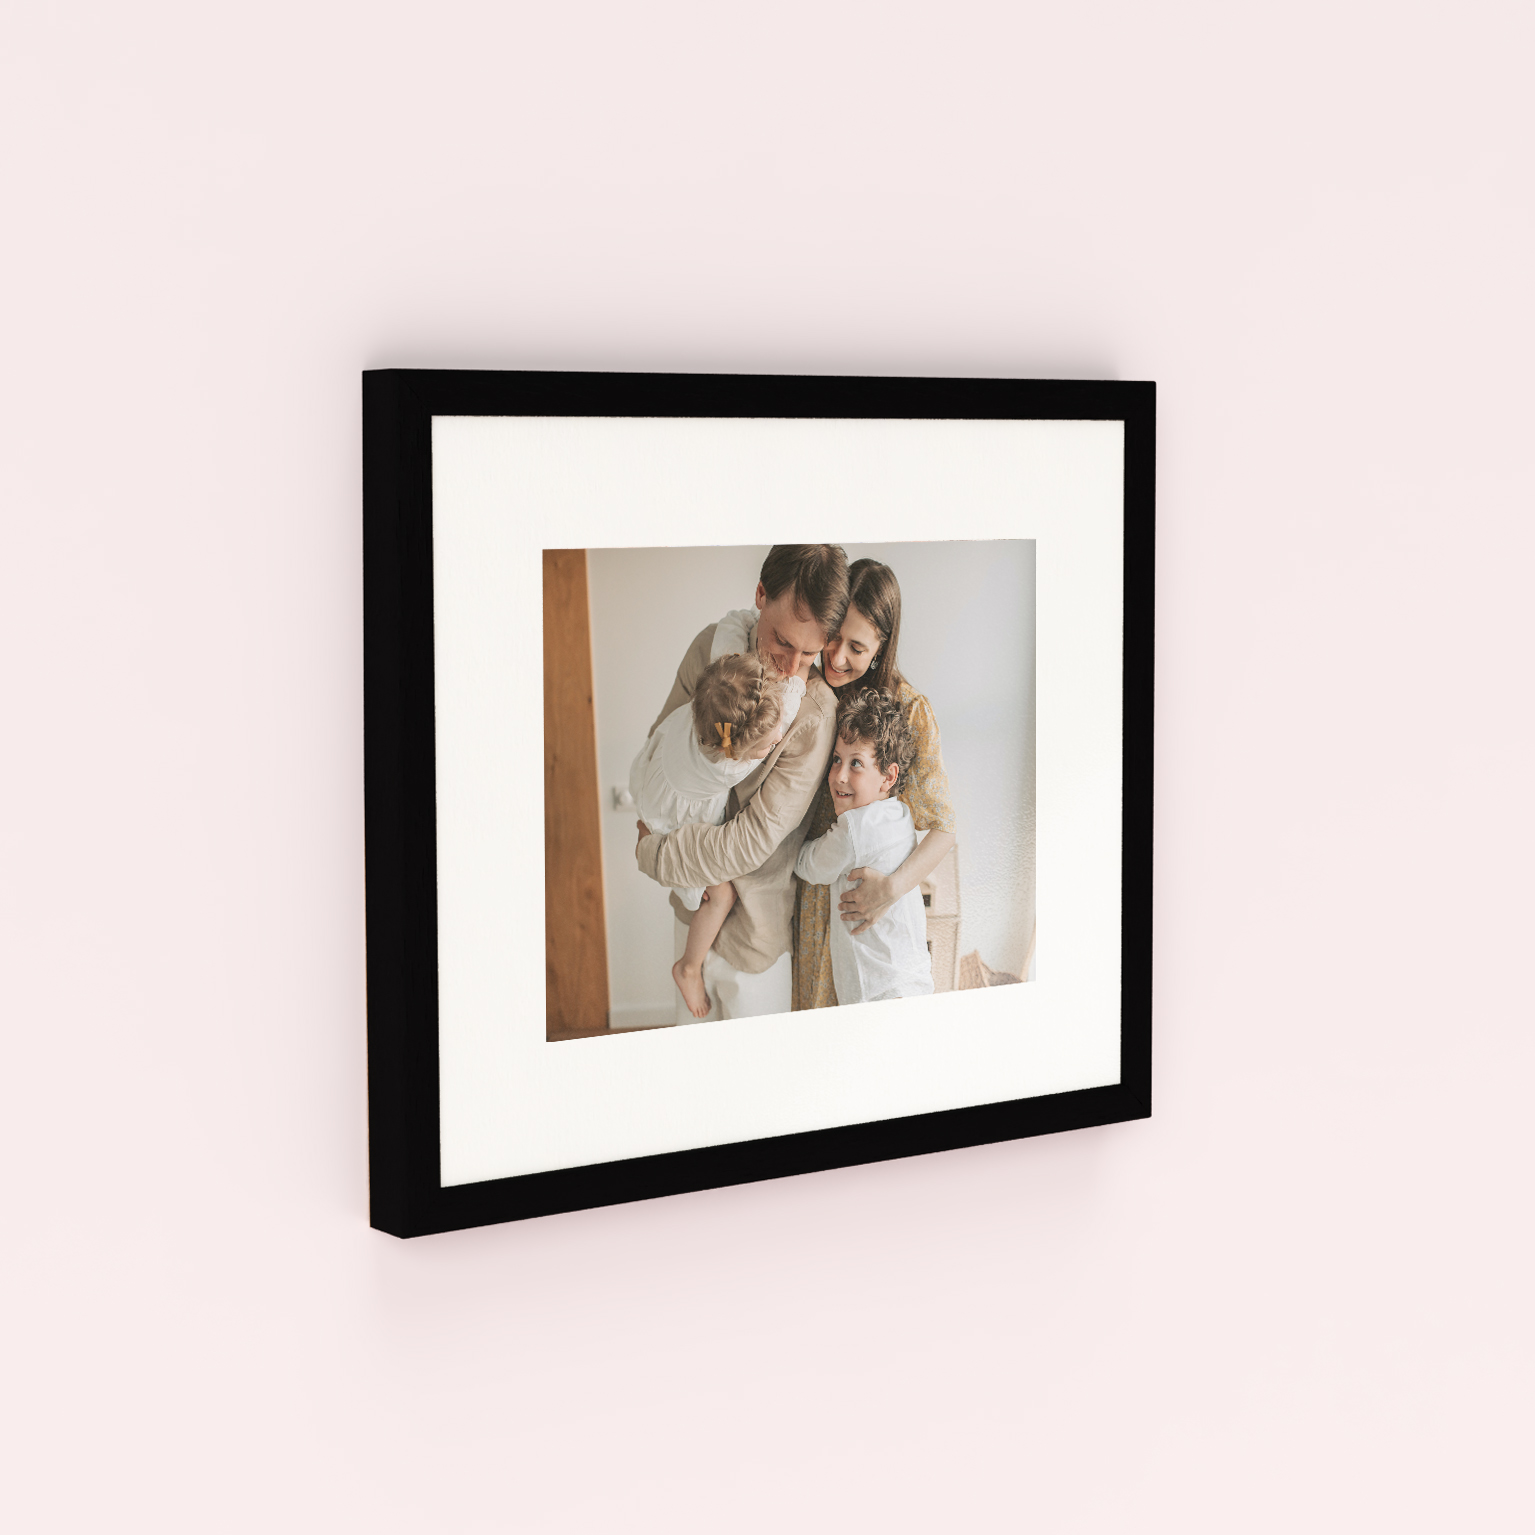 Simple Landscape Framed Photo Print - Craft a one-of-a-kind masterpiece reflecting your taste and cherished experiences.